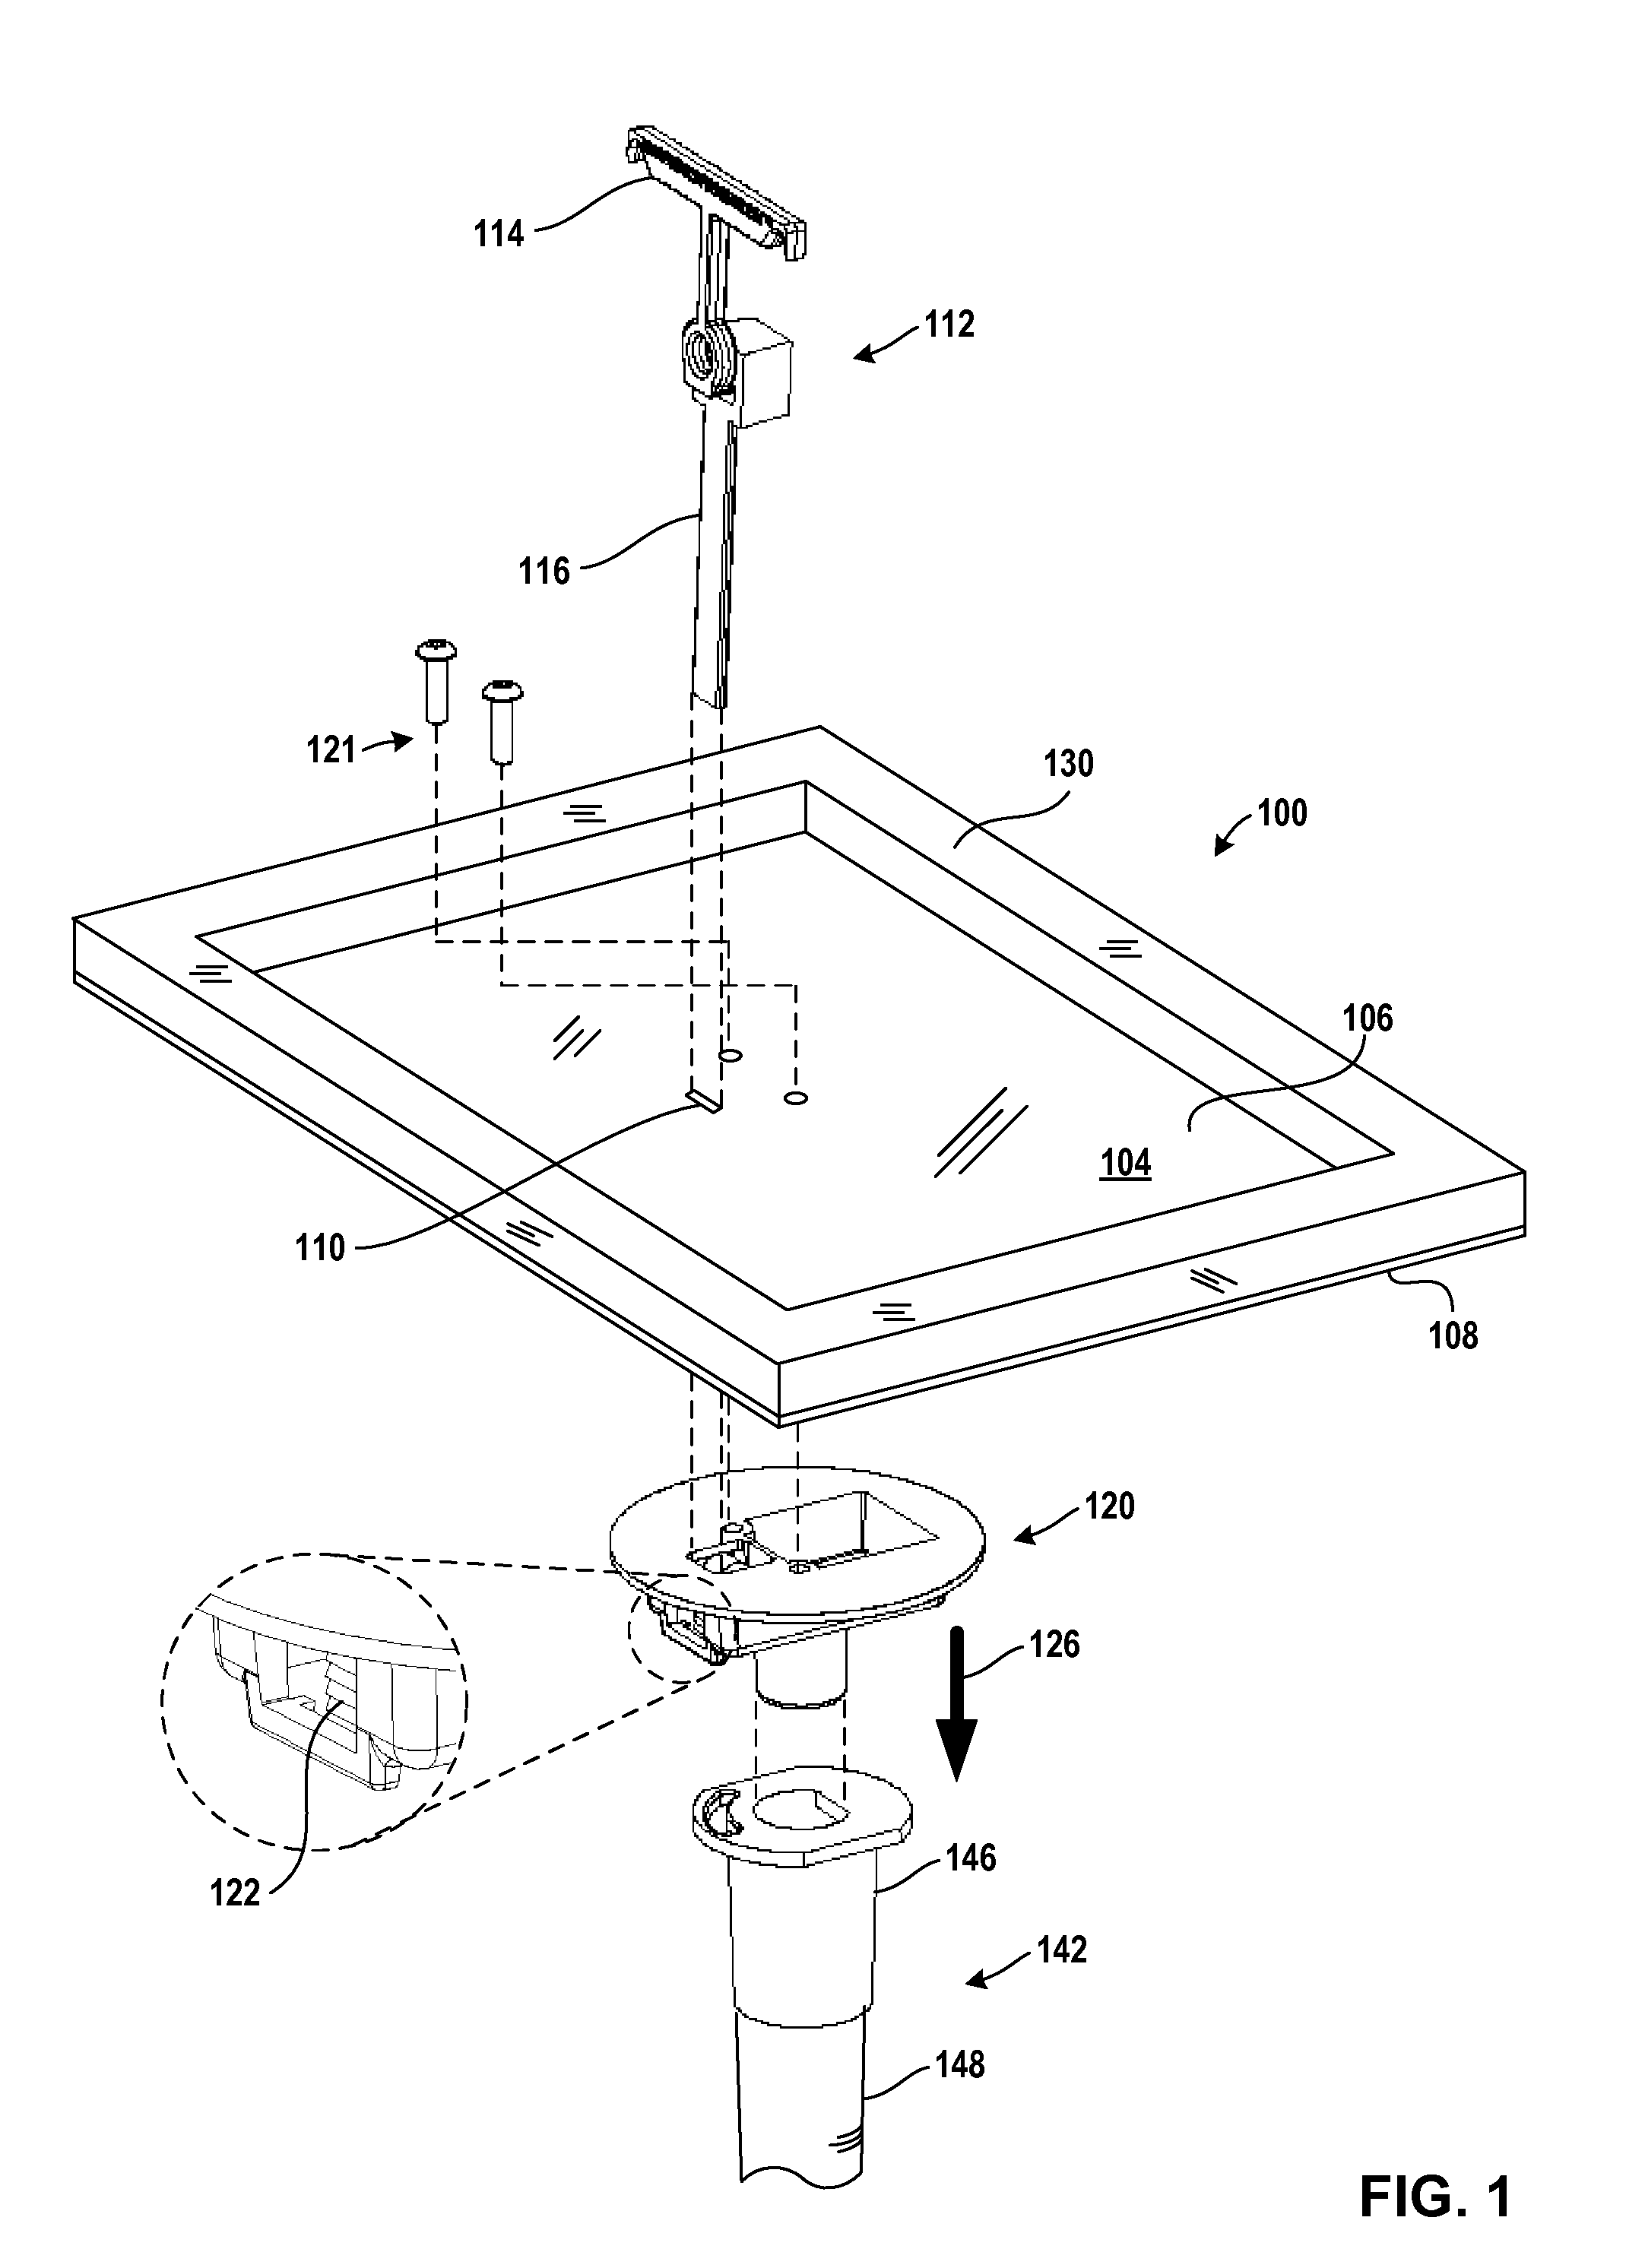 Air duct sealing system for obstructing or directing airflow through portions of an air duct system